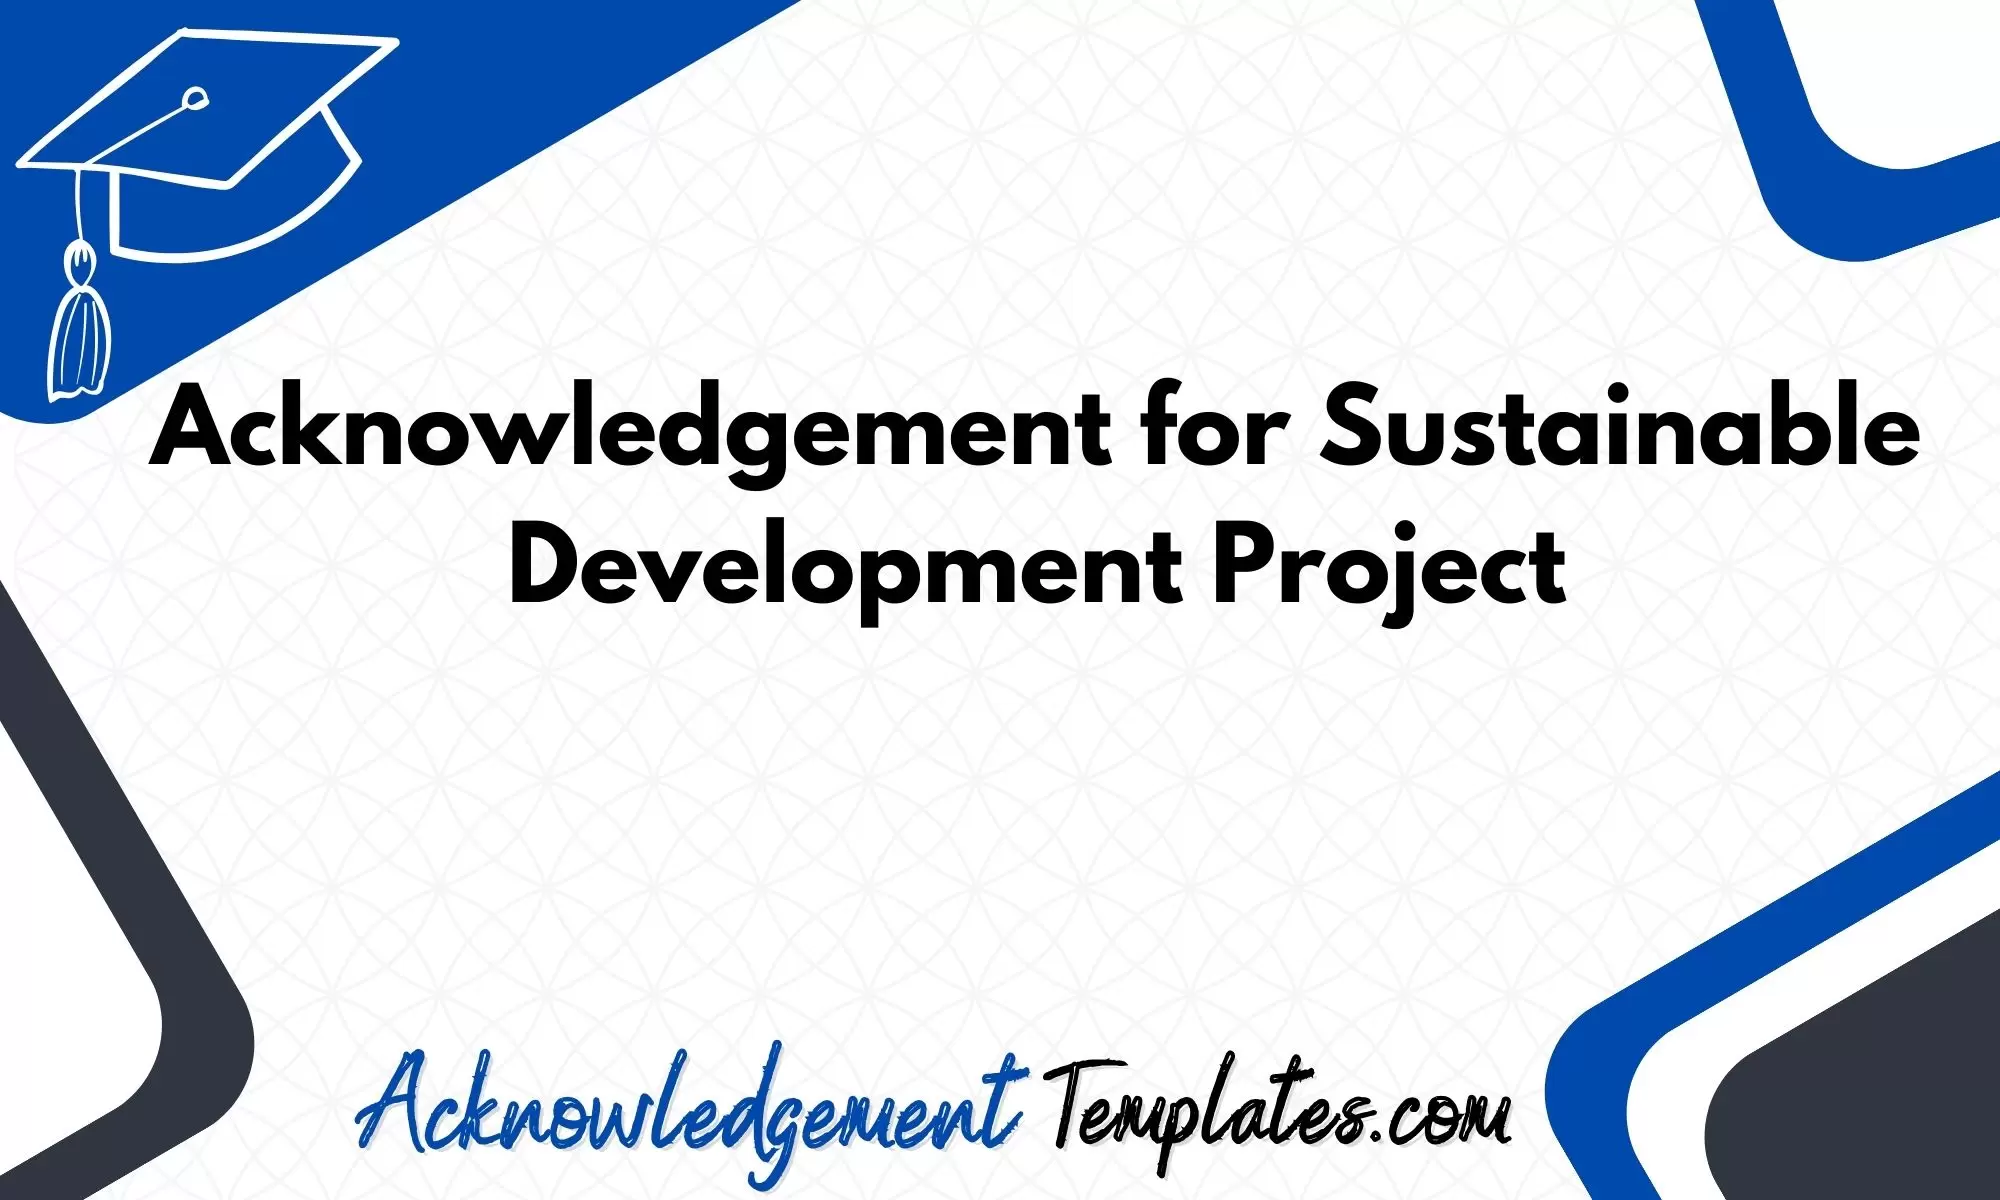 Acknowledgement for Sustainable Development Project